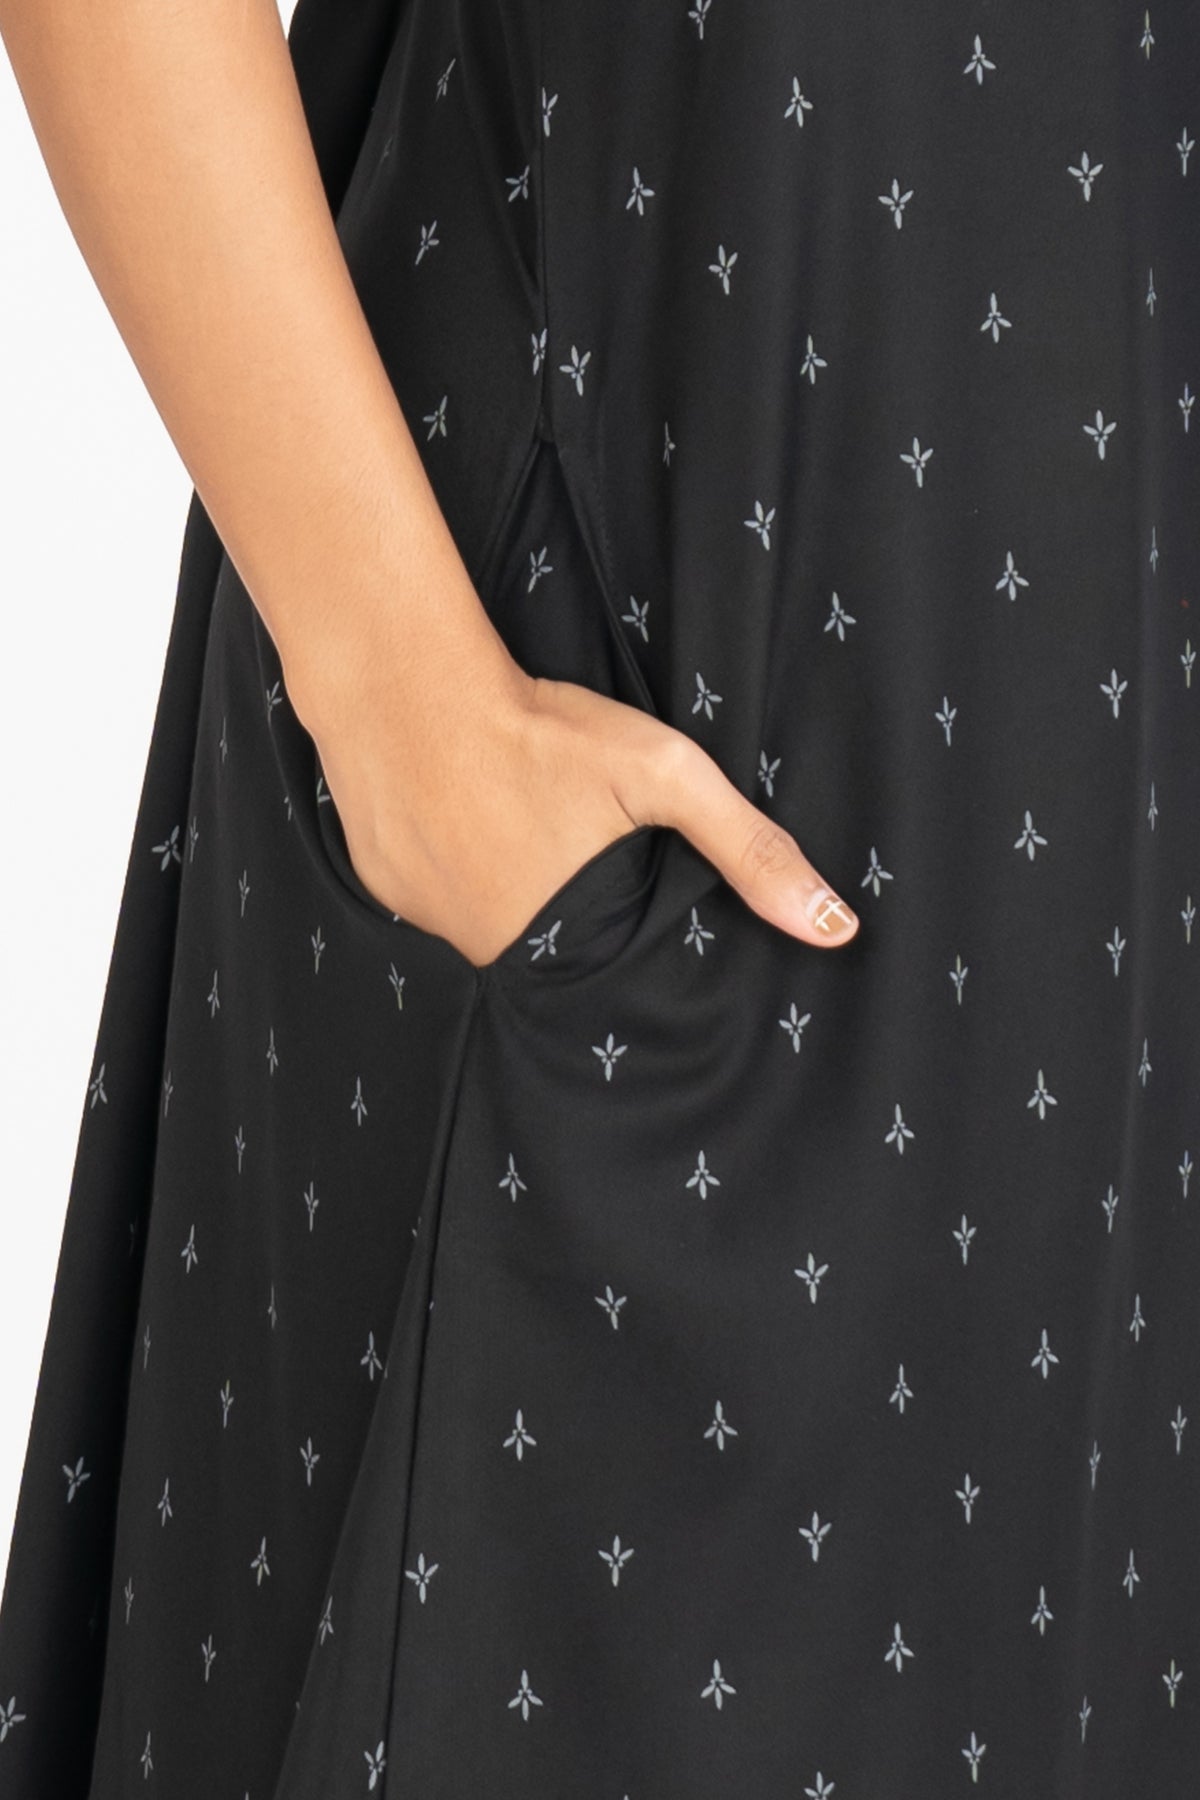 All Over Geometric Print With Contrast Floral Embroidered Yoke Nighty -  Black